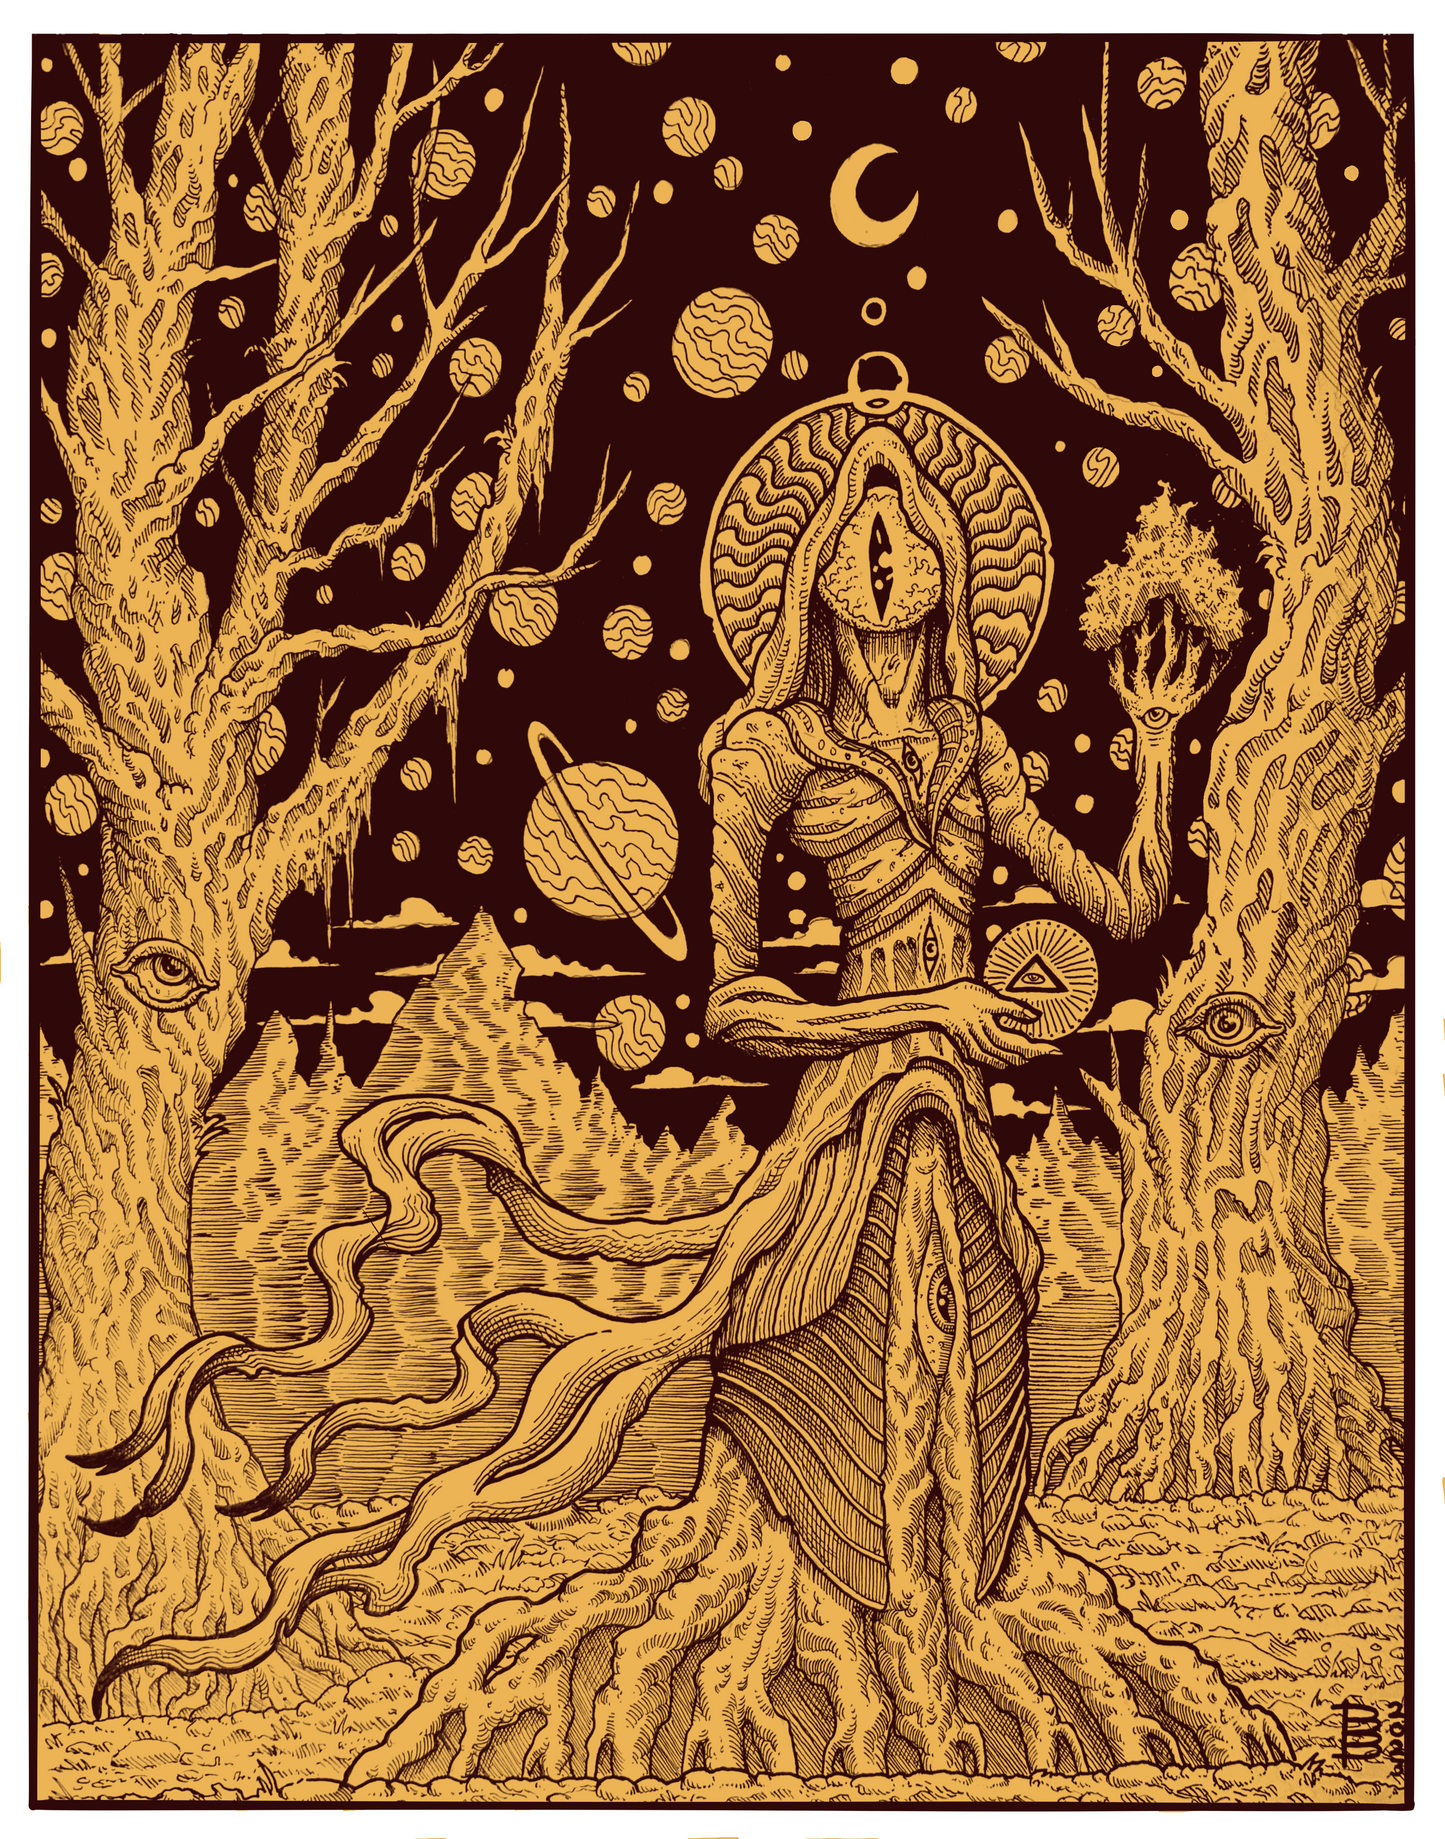 “TREE MOTHER” 11in x 14in Limited Edition Print